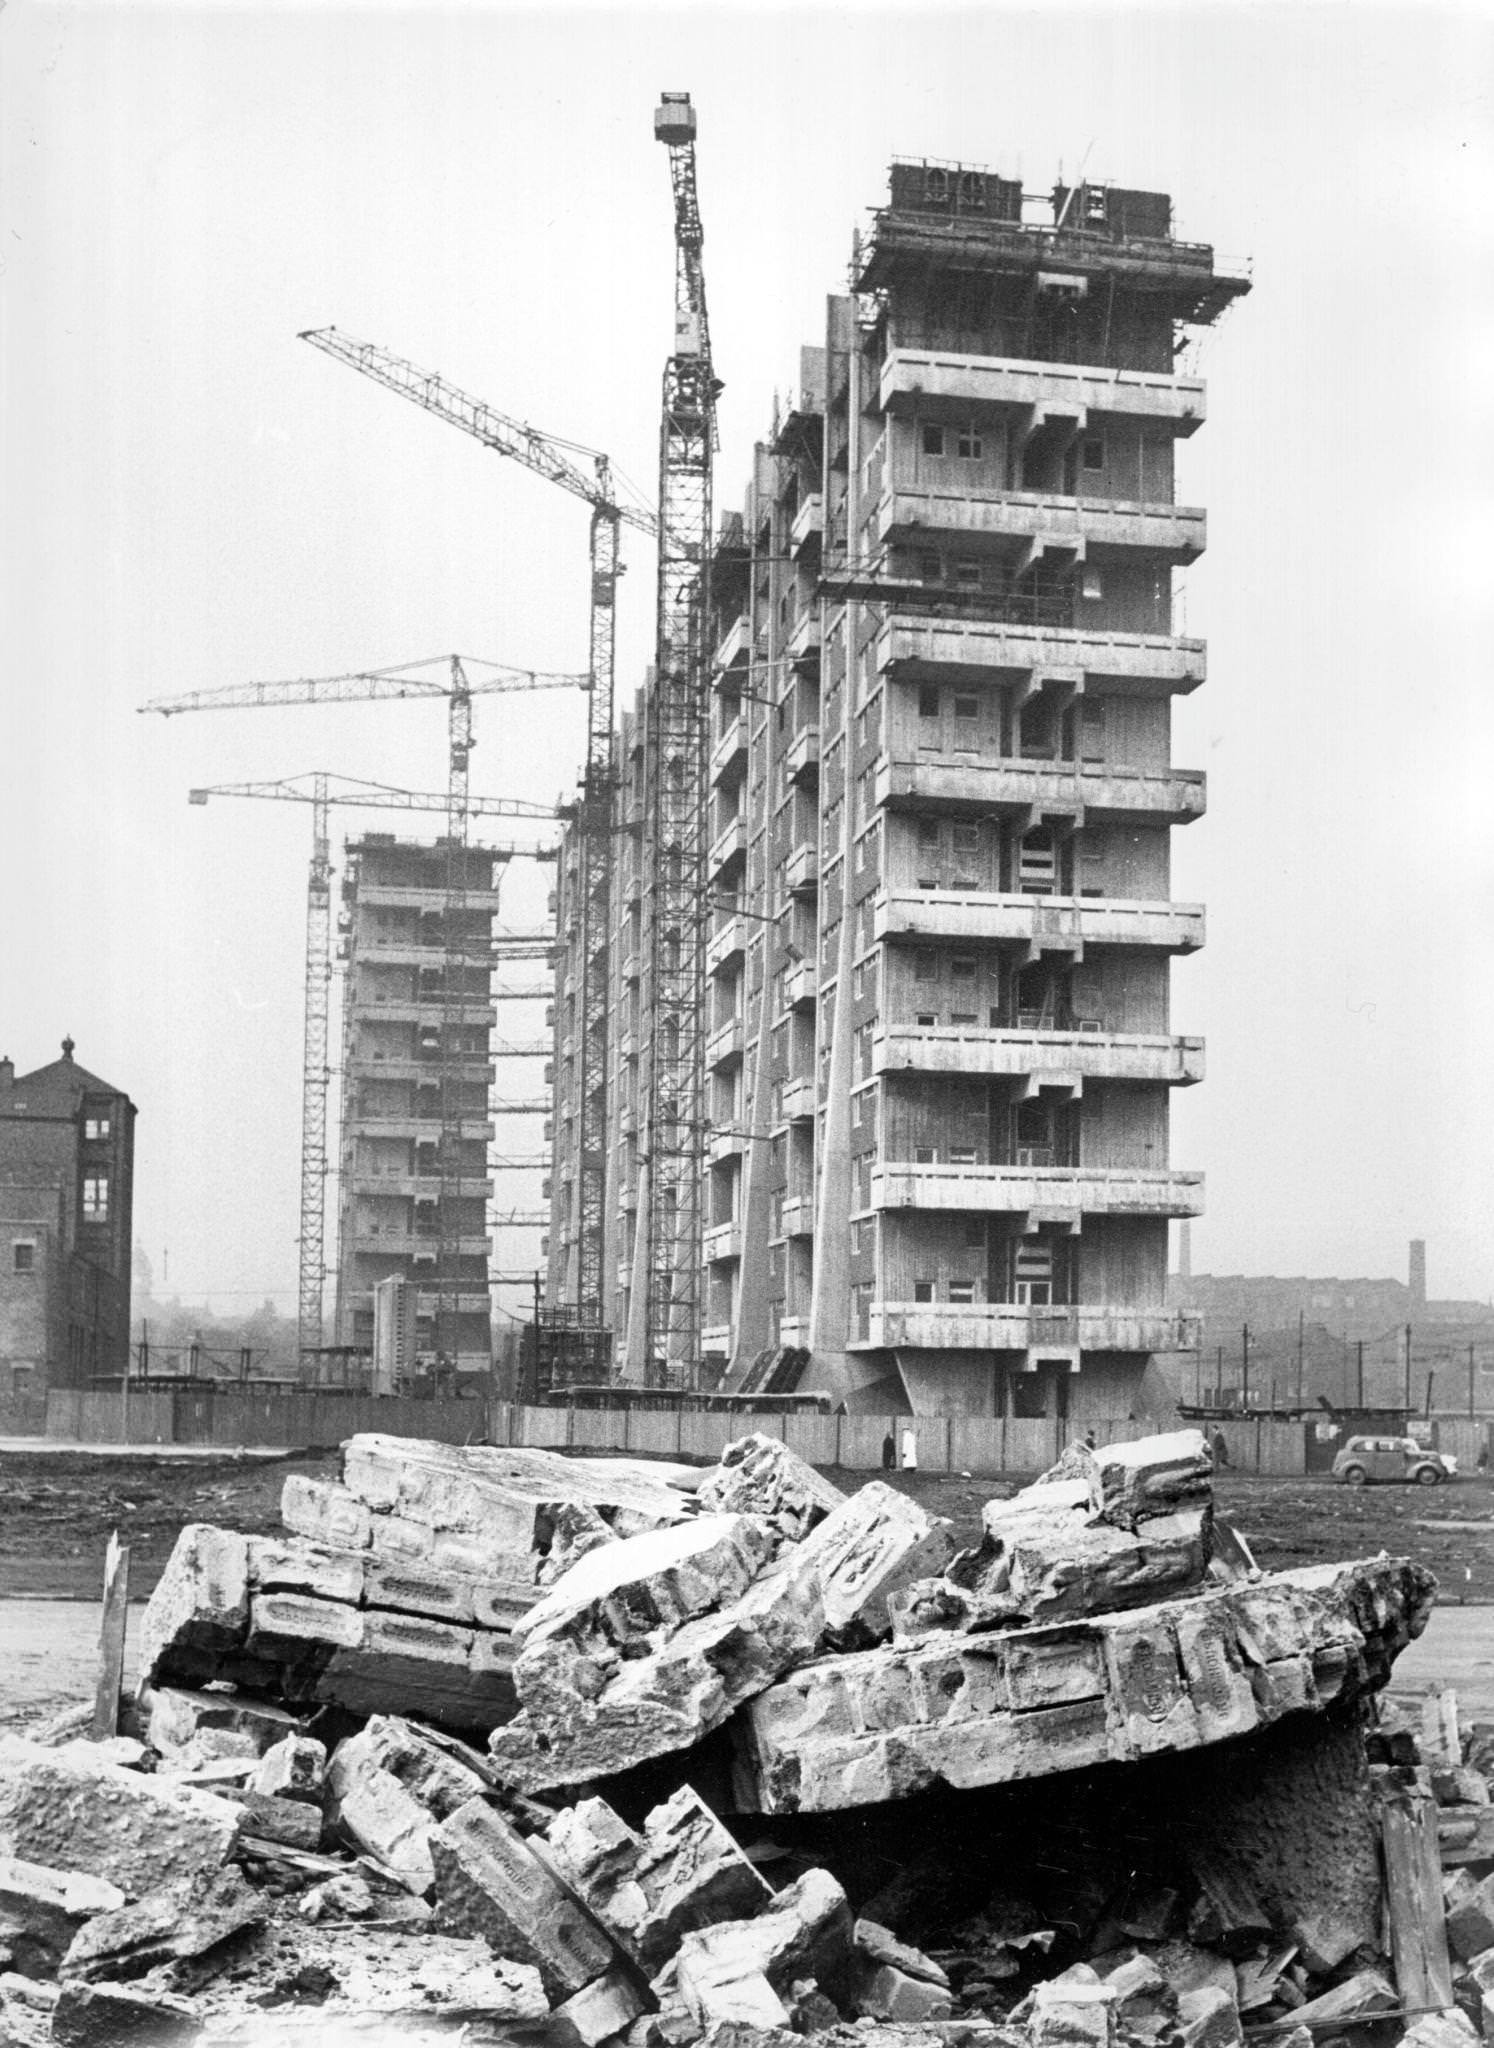 Tower blocks under construction in the Gorbals area of Glasgow, 1960